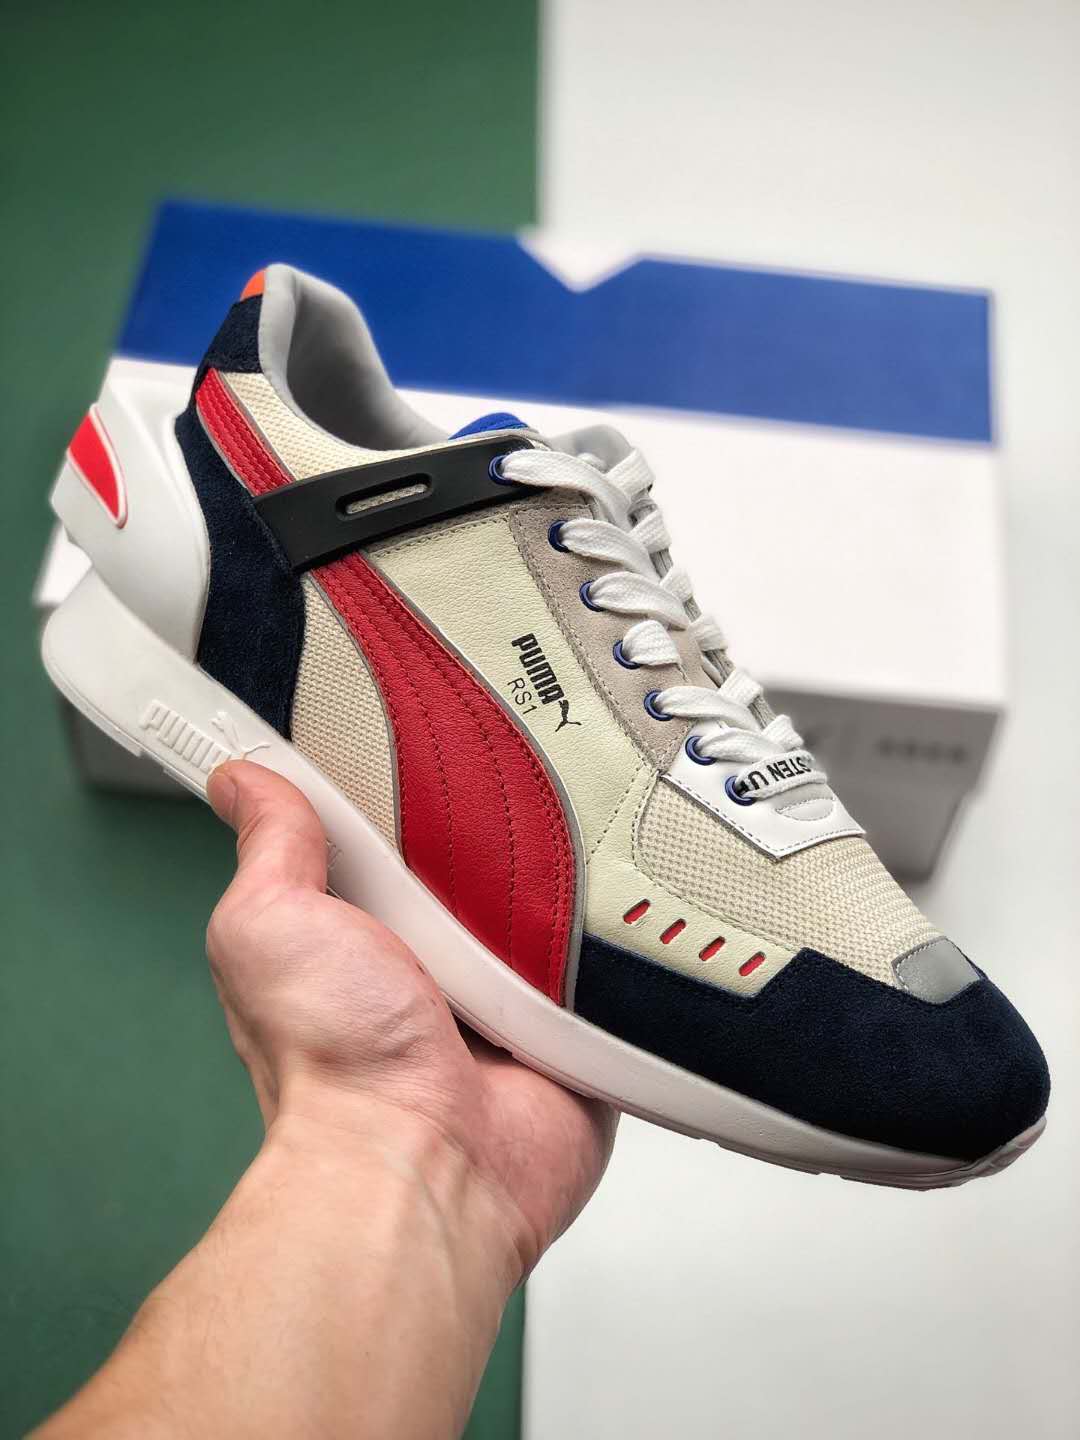 Puma Ader Error x RS-1 White Blue Red 369537-01 | Limited Edition